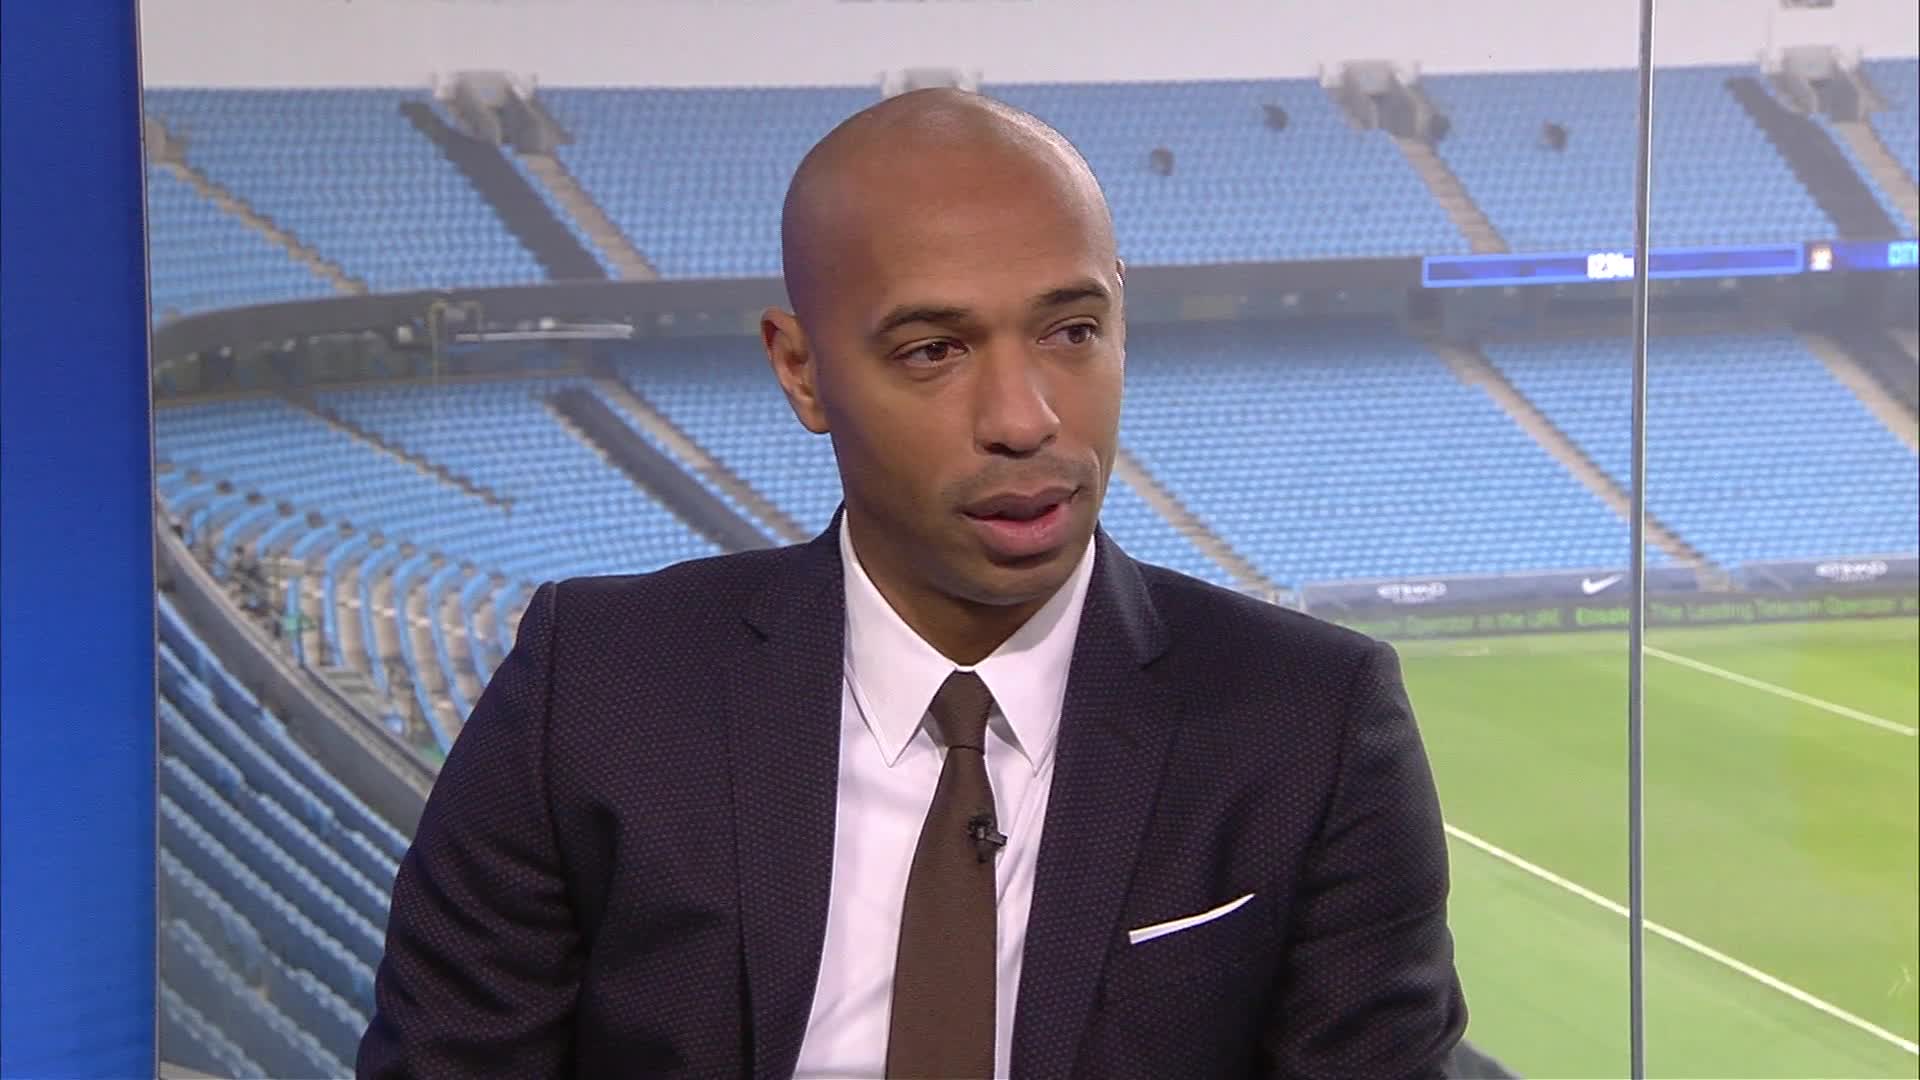 Henry says he told Lukaku to not join Chelsea.